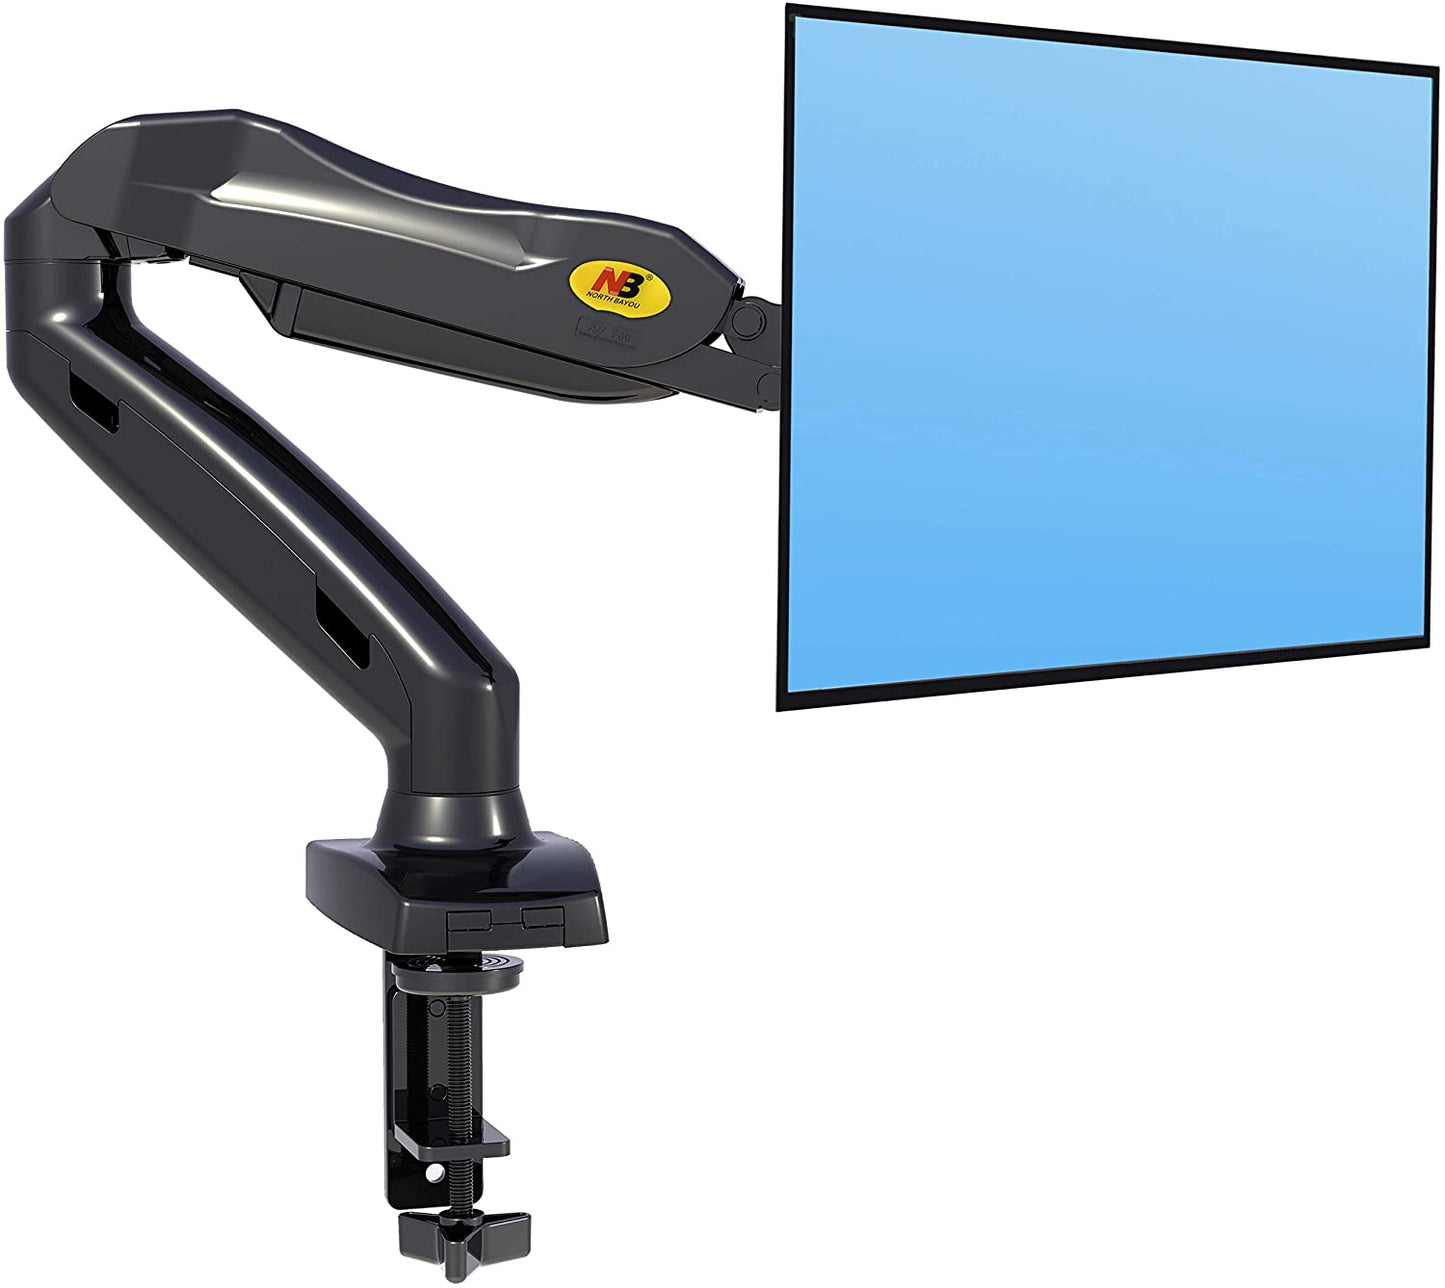 NB North Bayou F80 17"- 30" with 9Kg Max Payload Heavy Duty VESA Monitor Desk Mount Stand and Gas Strut Full Motion Swivel Computer Arm for LCD LED TV Television